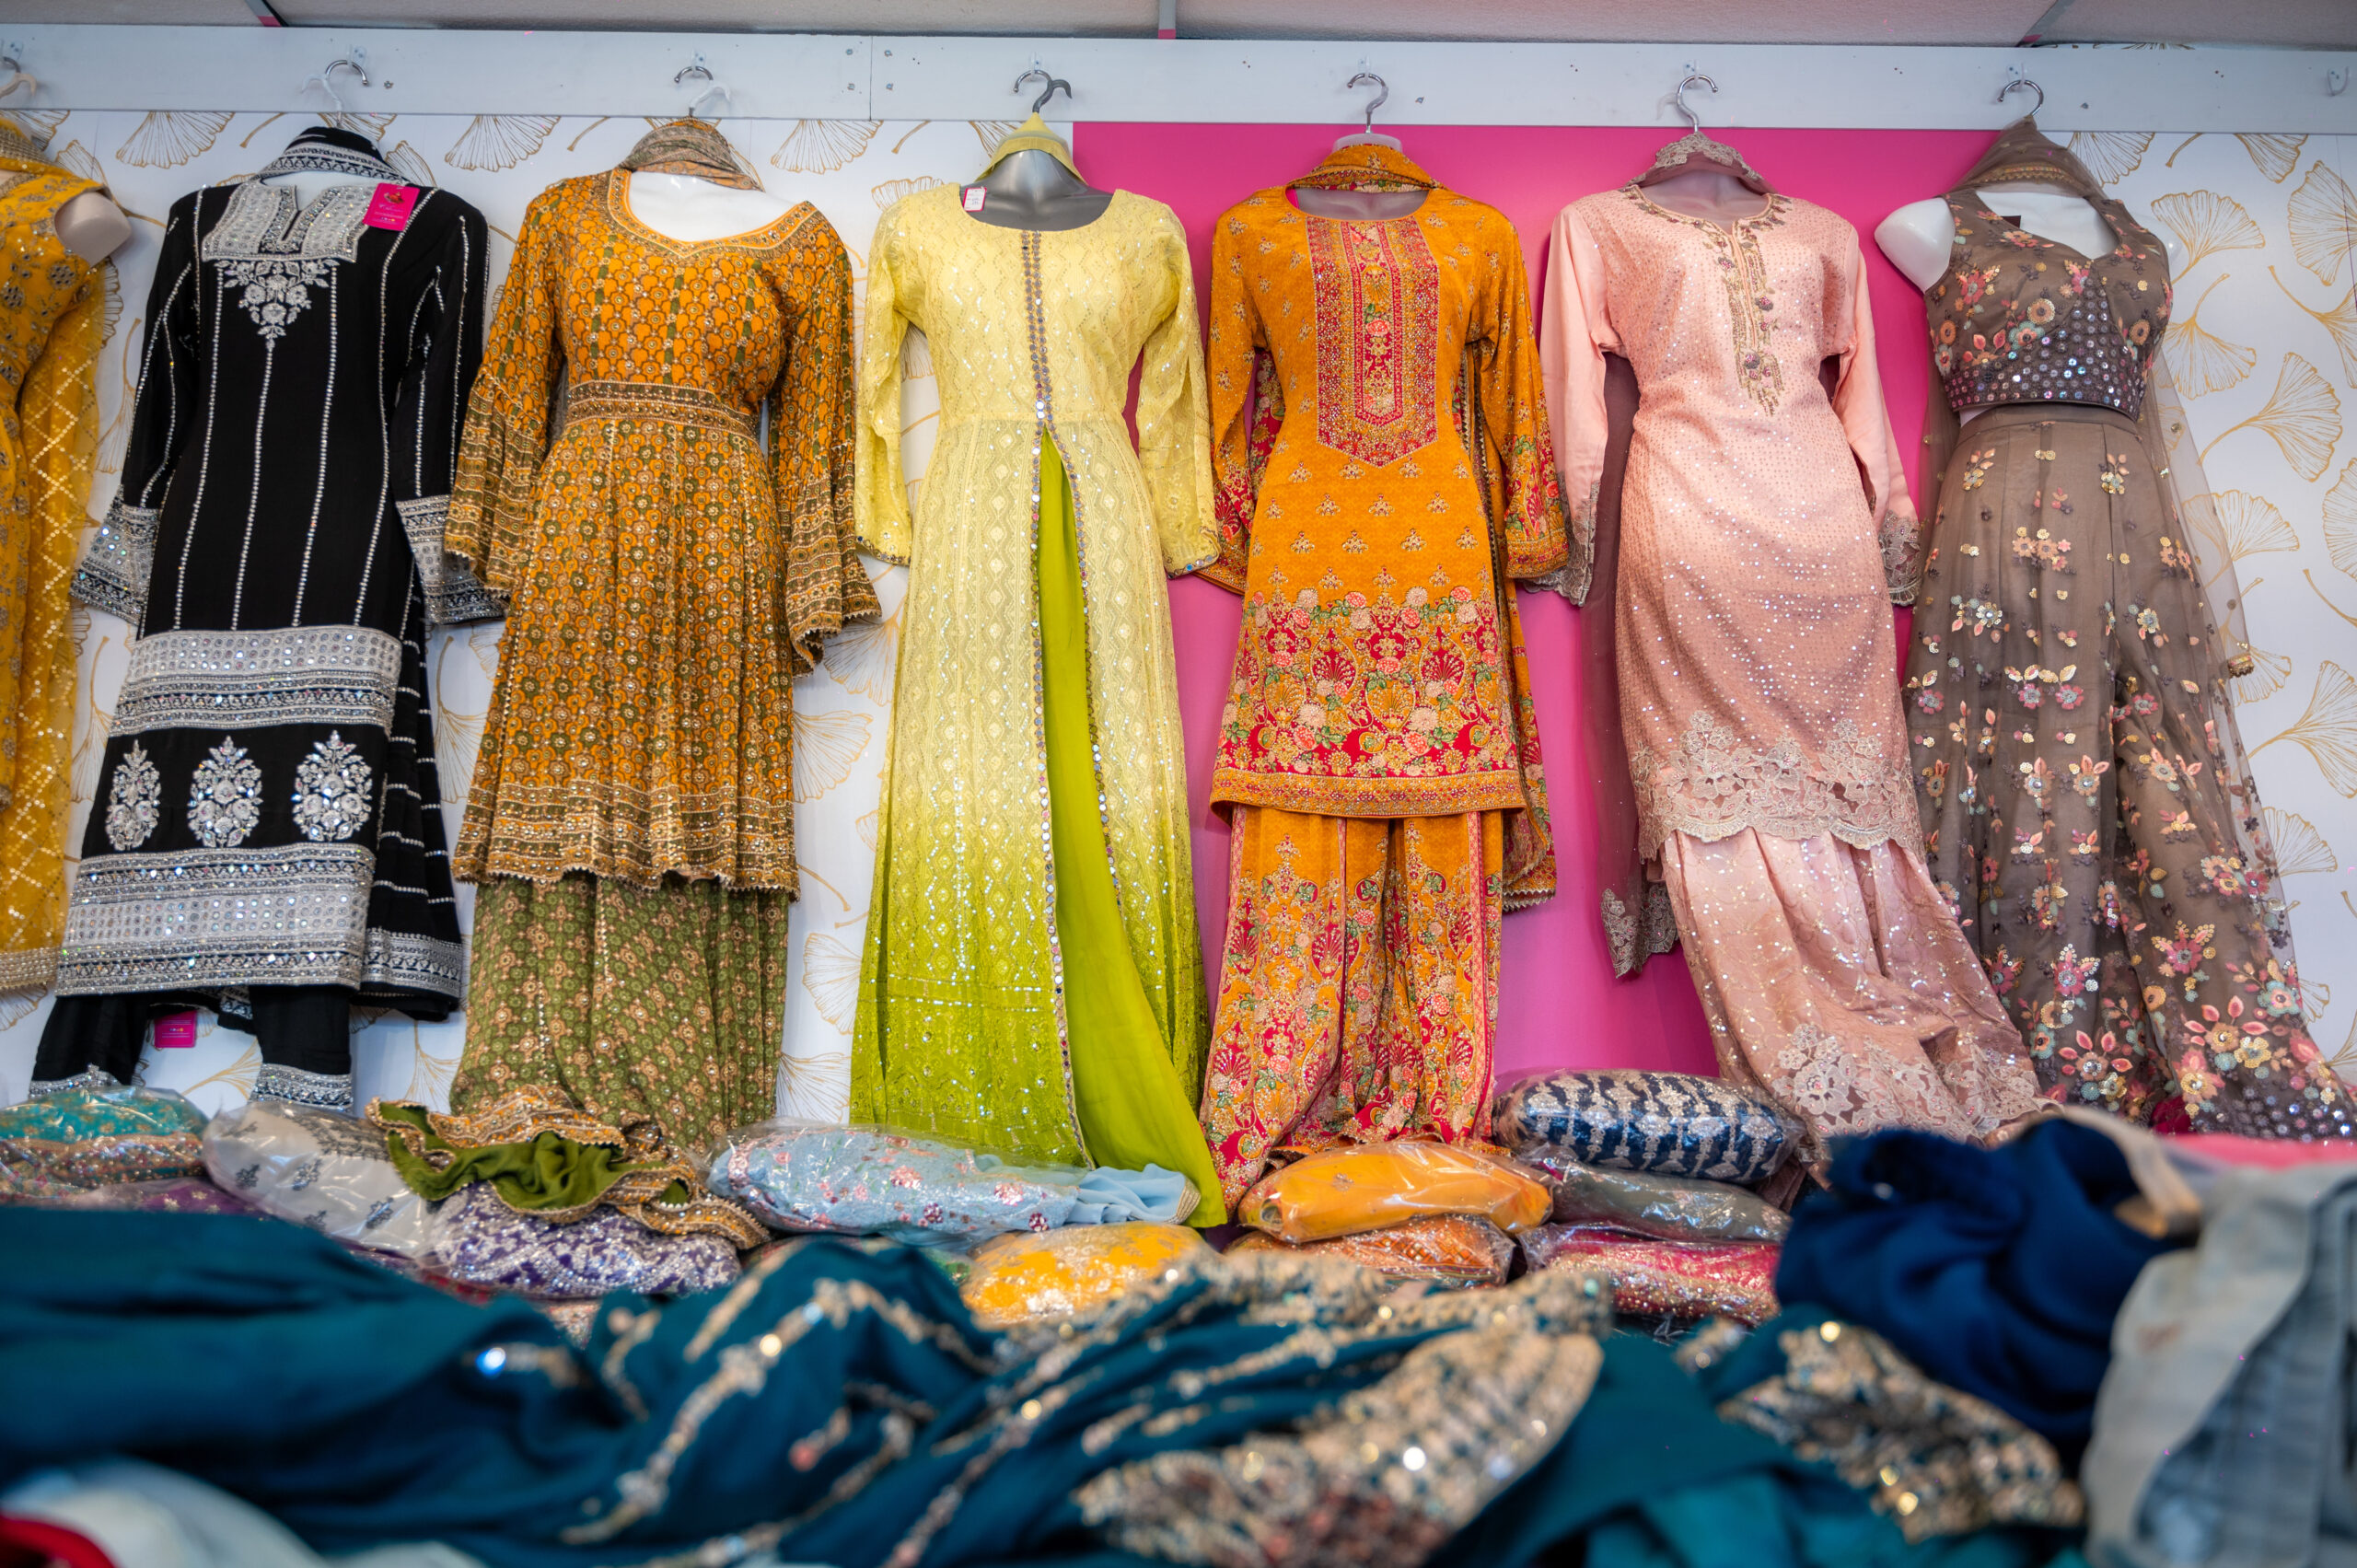 Handmade embroidered tunics and pants in a variety of colours and patterns adorn a wall.